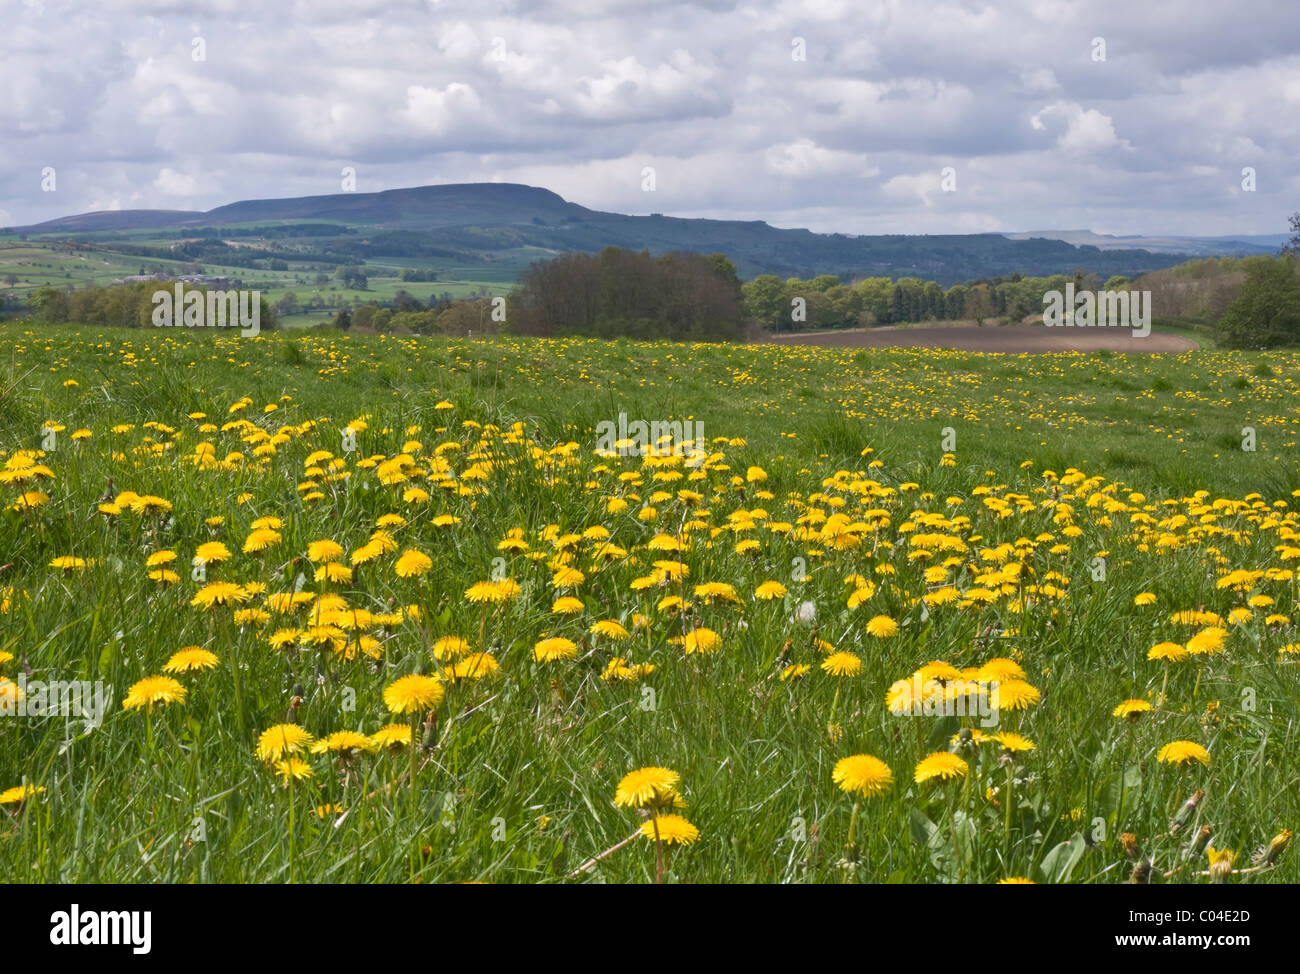 dandelions growing in a field near Spennithorne in Wensleydale, North Yorkshire. Penhill in the background. Stock Photo